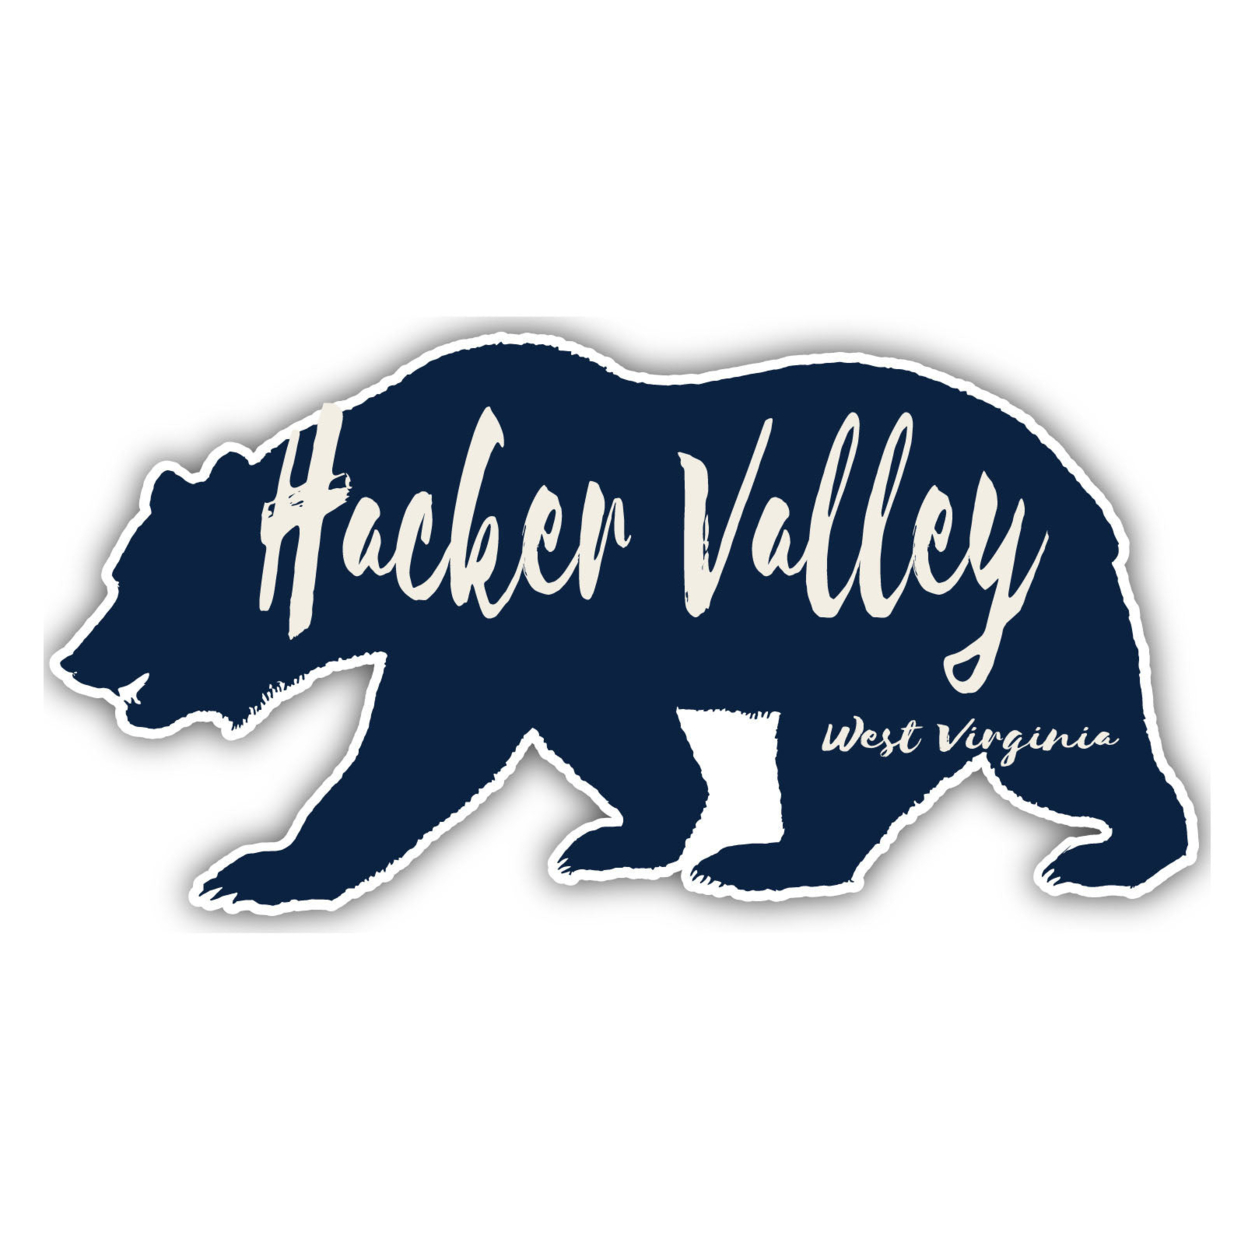 Hacker Valley West Virginia Souvenir Decorative Stickers (Choose Theme And Size) - 4-Pack, 2-Inch, Great Outdoors